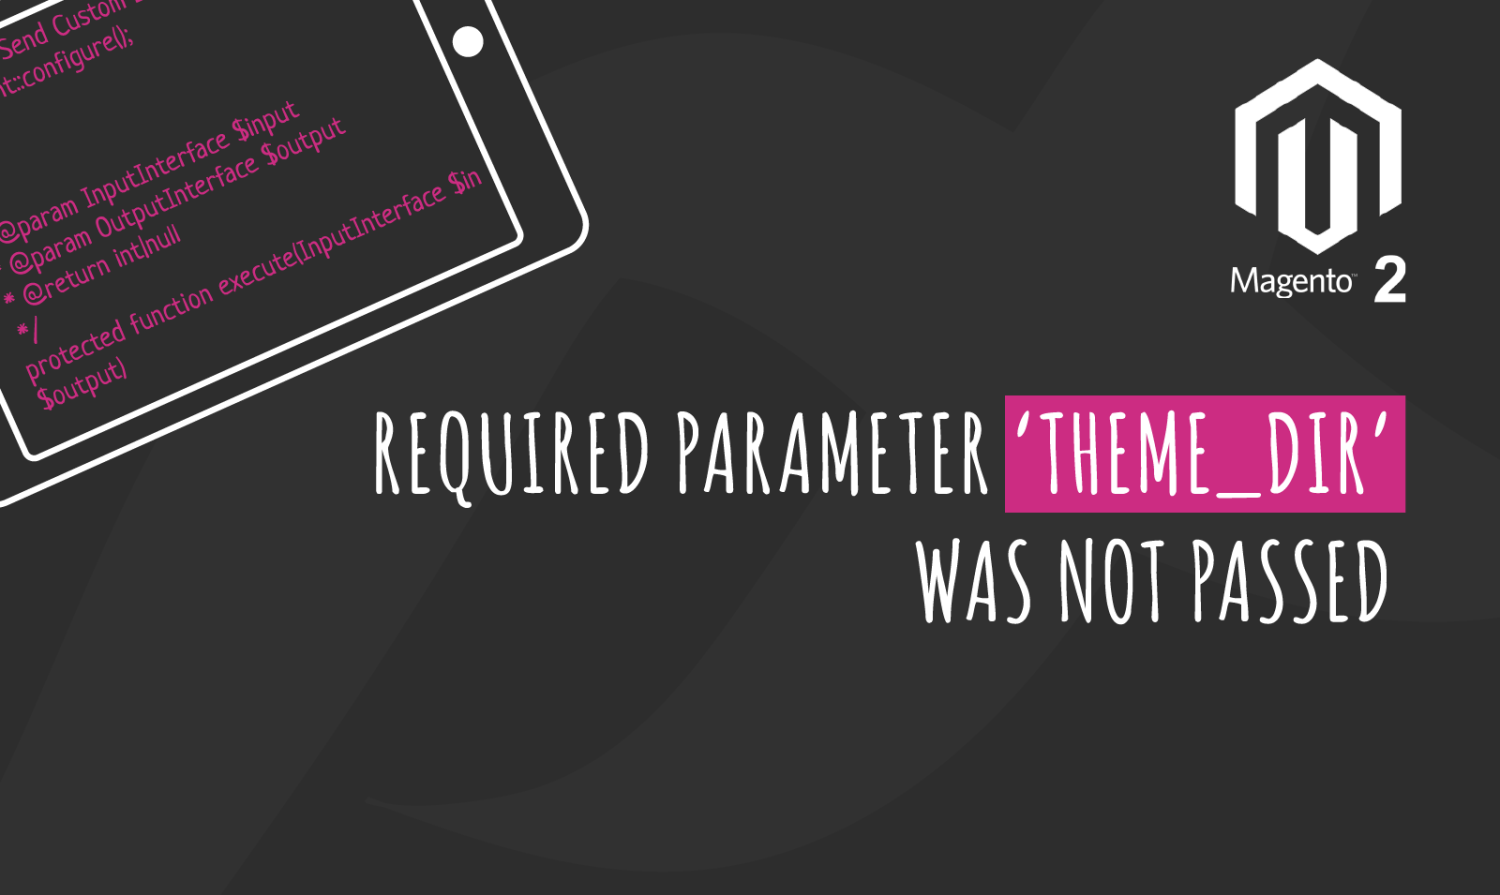 Magento 2: Required parameter ‘theme_dir’ was not passed